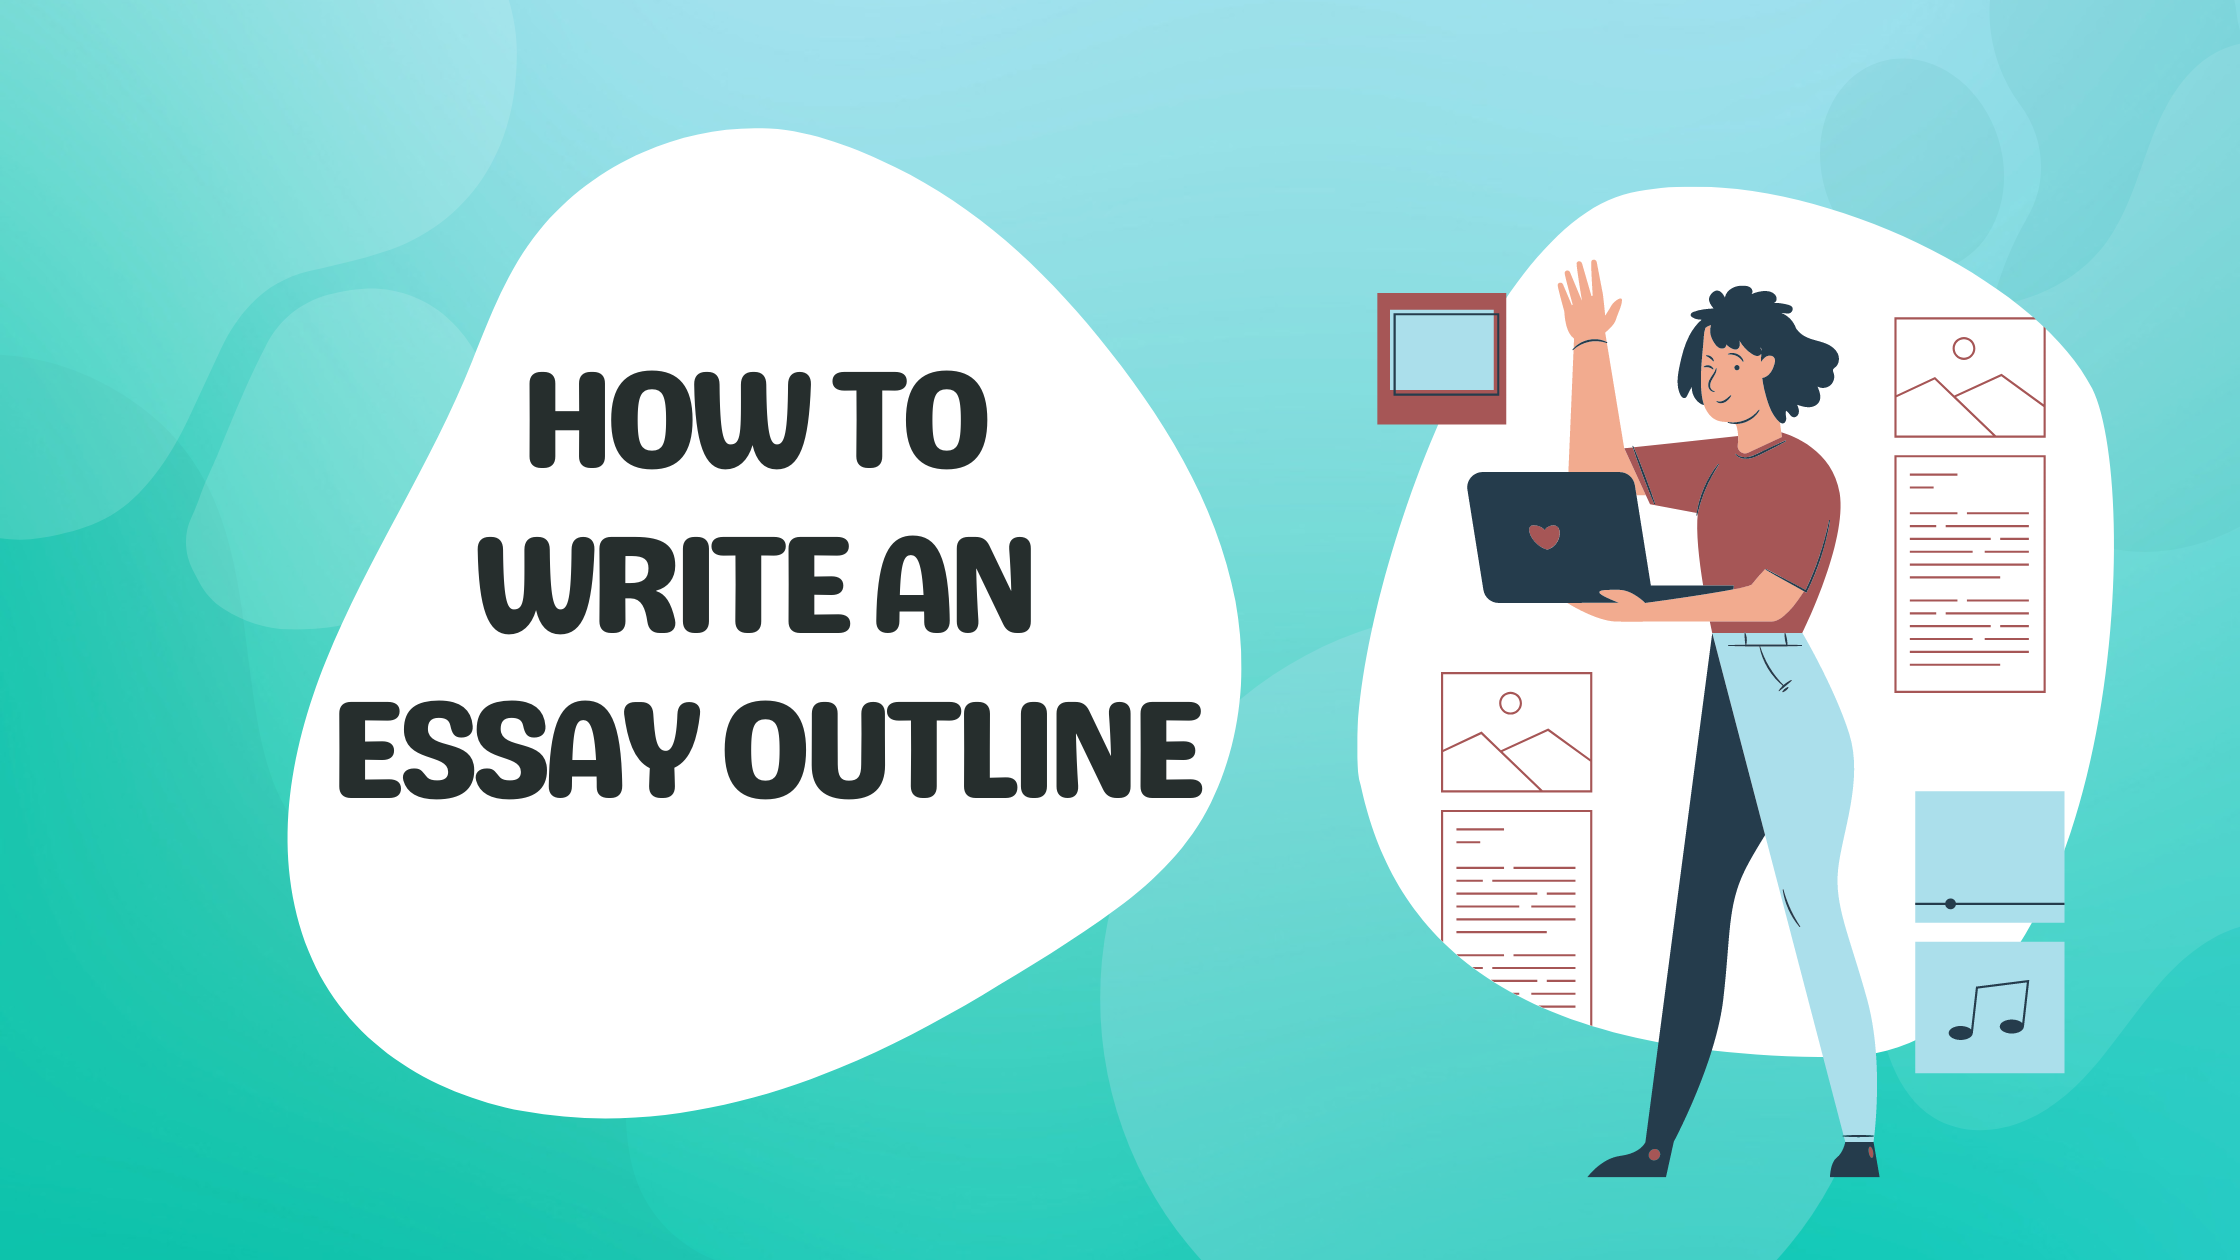 Best Tips to Write an Essay Outline